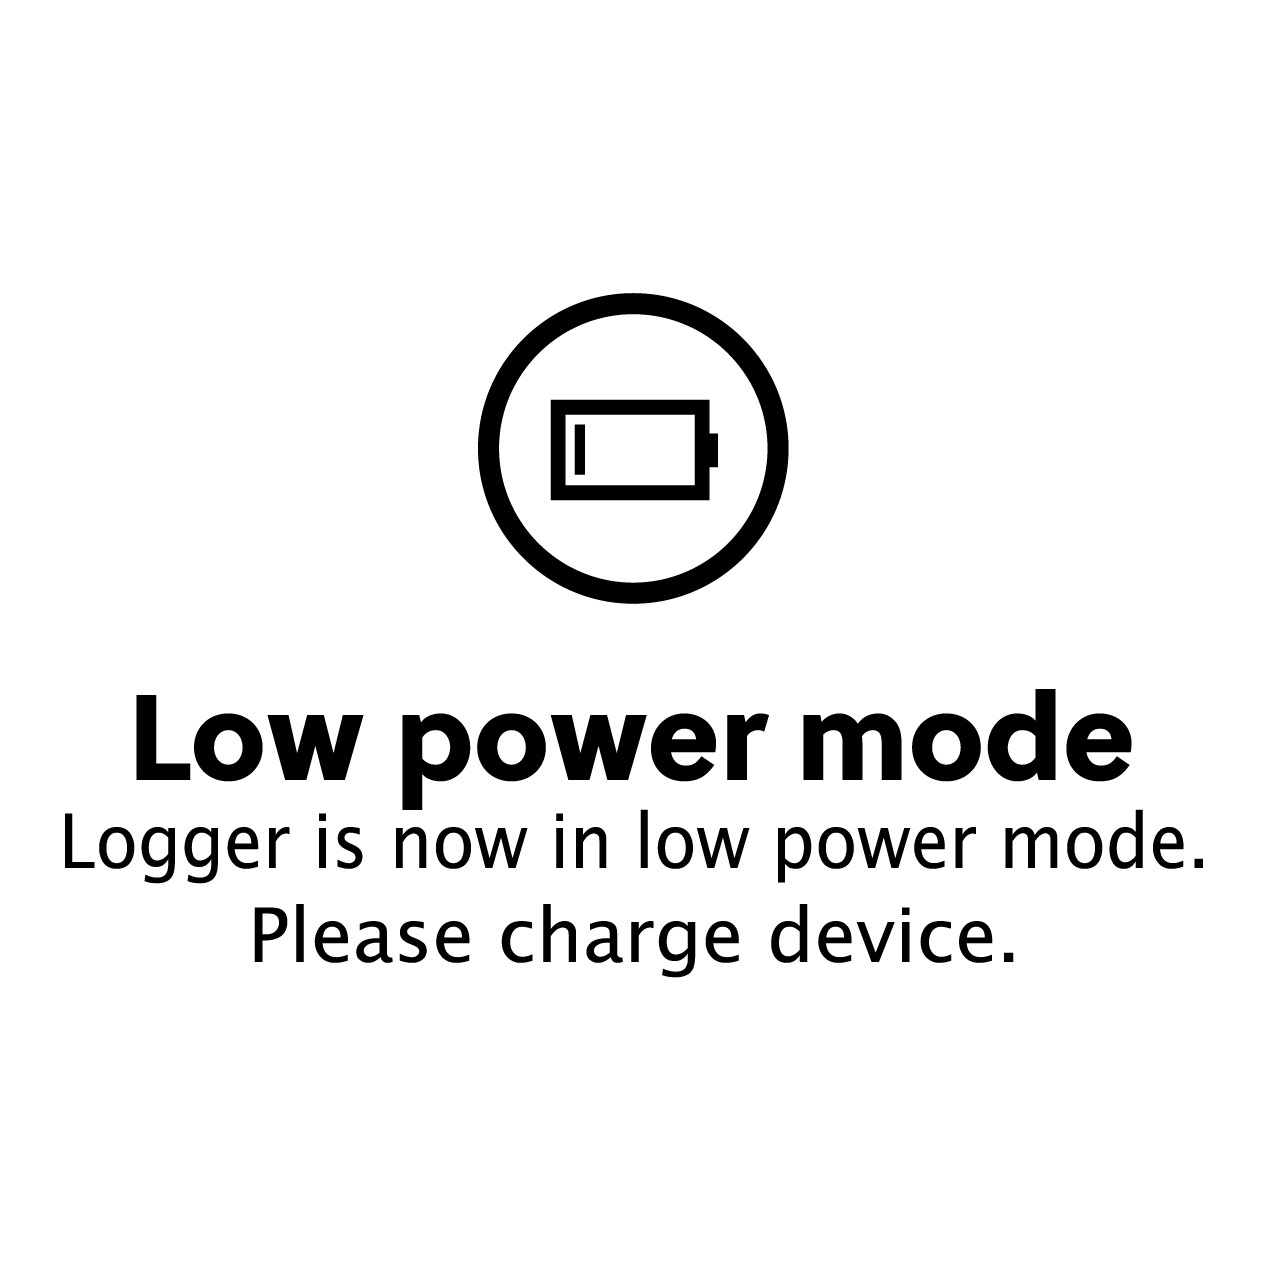 Low power mode. The logger is now in low power mode. Please charge the device.